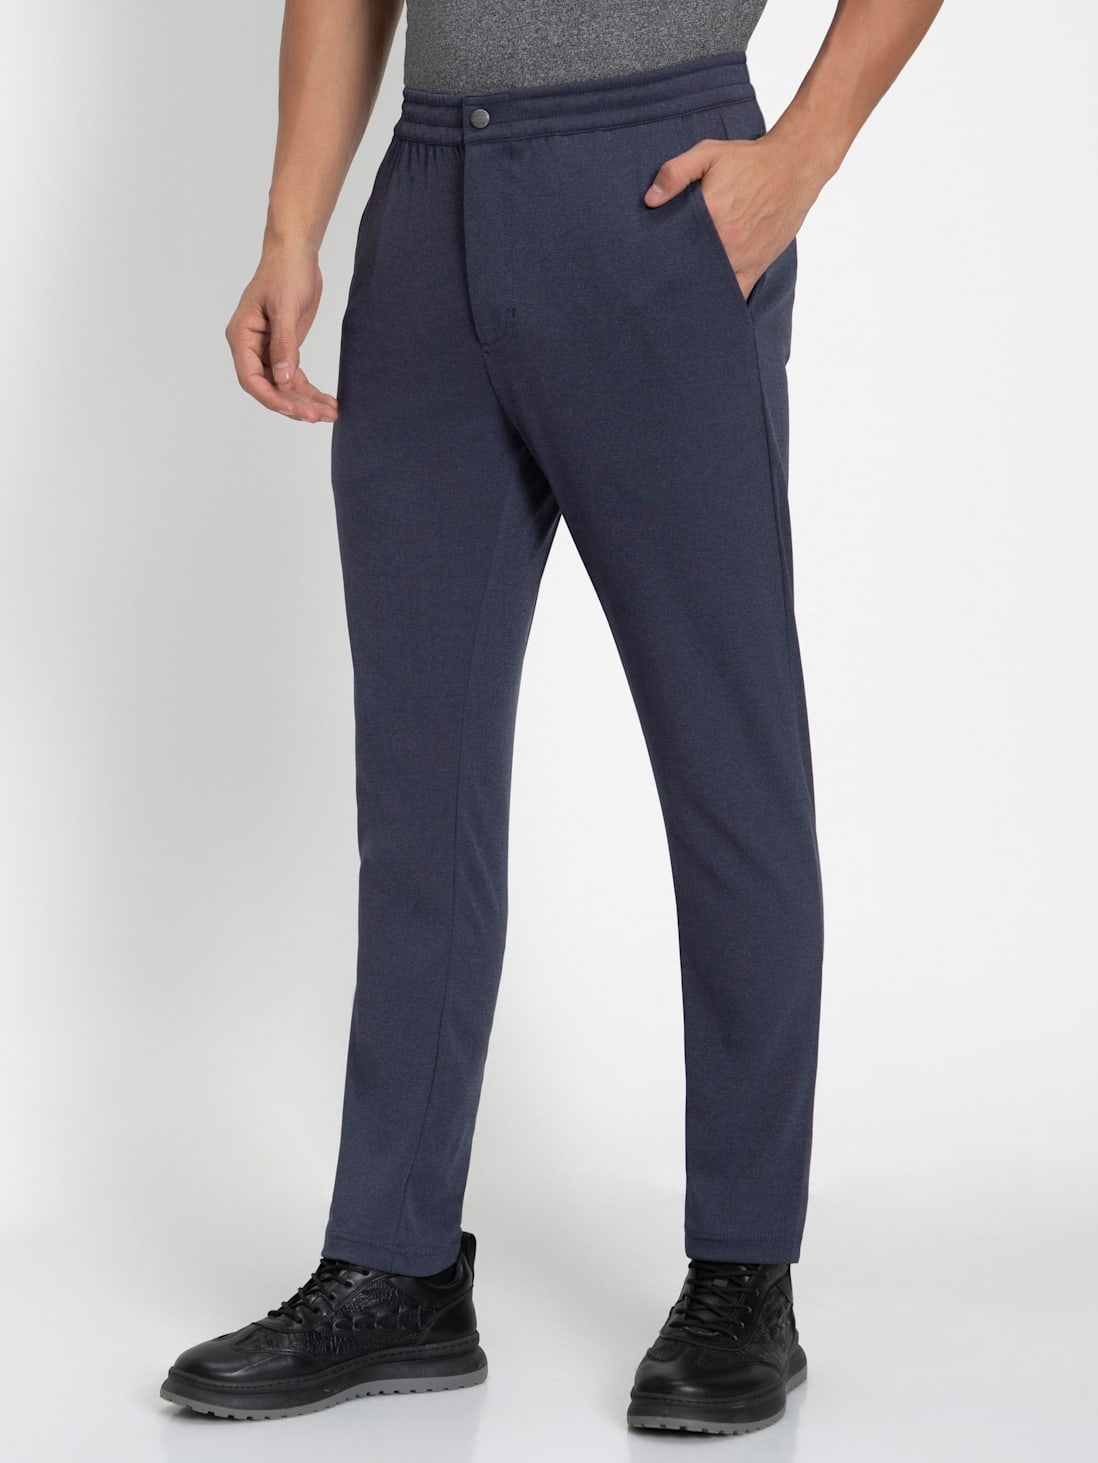 Men's Microfiber Slim Fit All Day Pants with Convenient Side and Back  Pockets - Mid Blue Sand